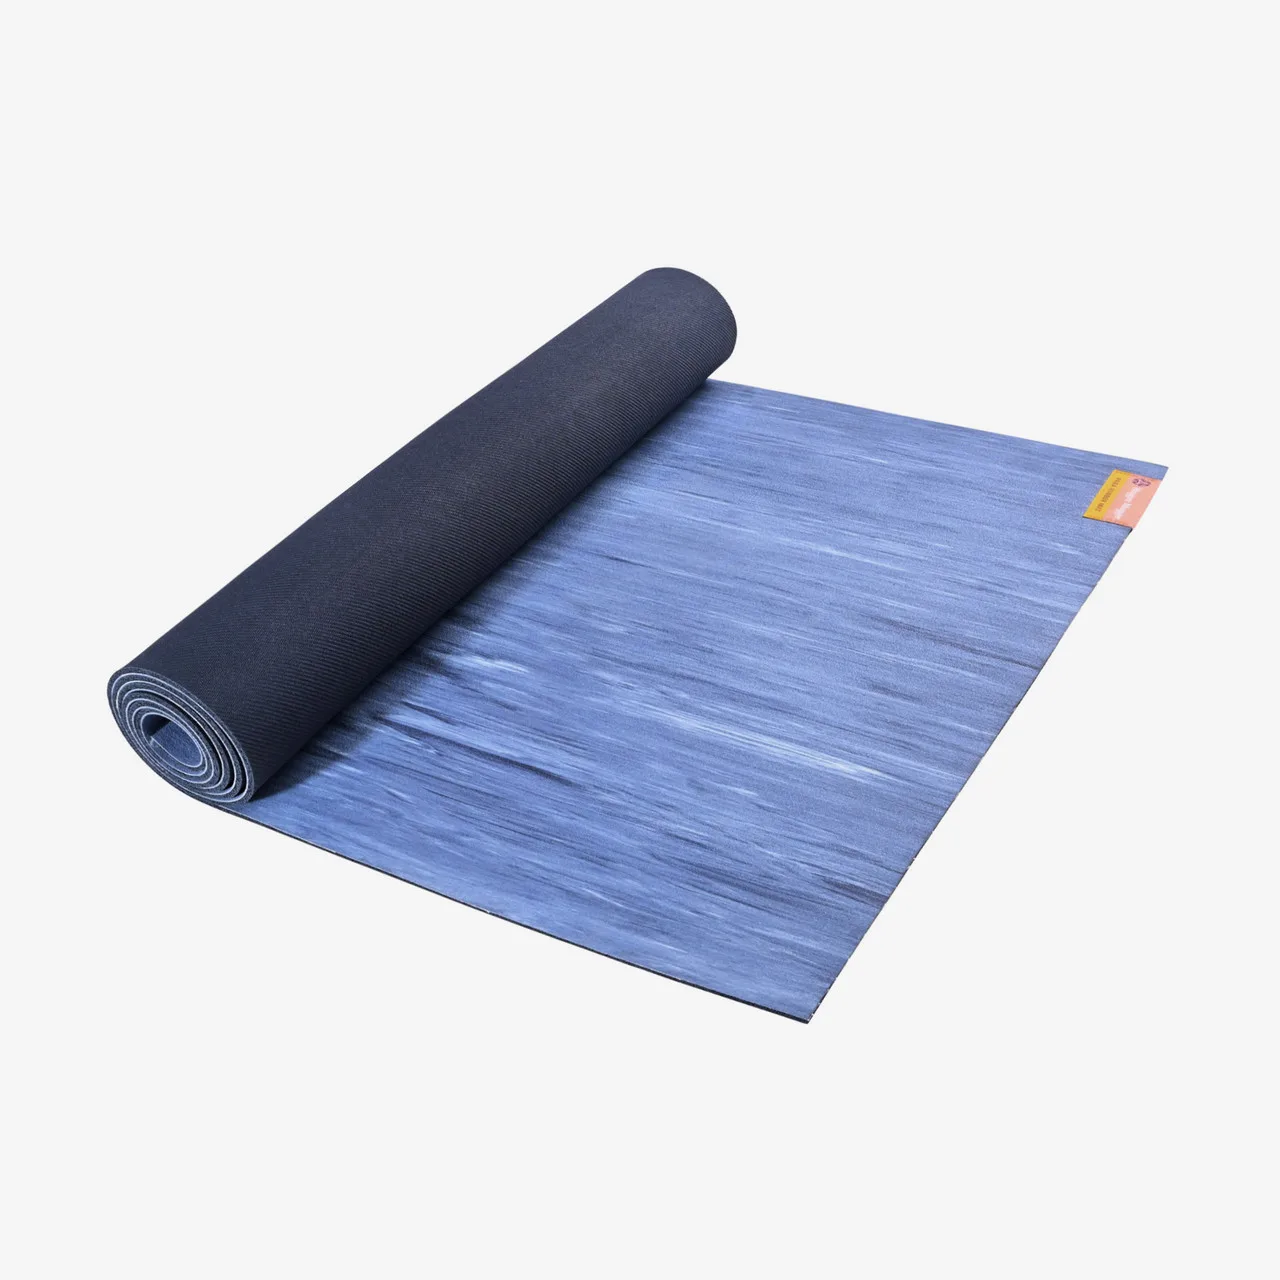 YOGA MAT STRAP - YOGGYS - Everything for your yoga practice. With